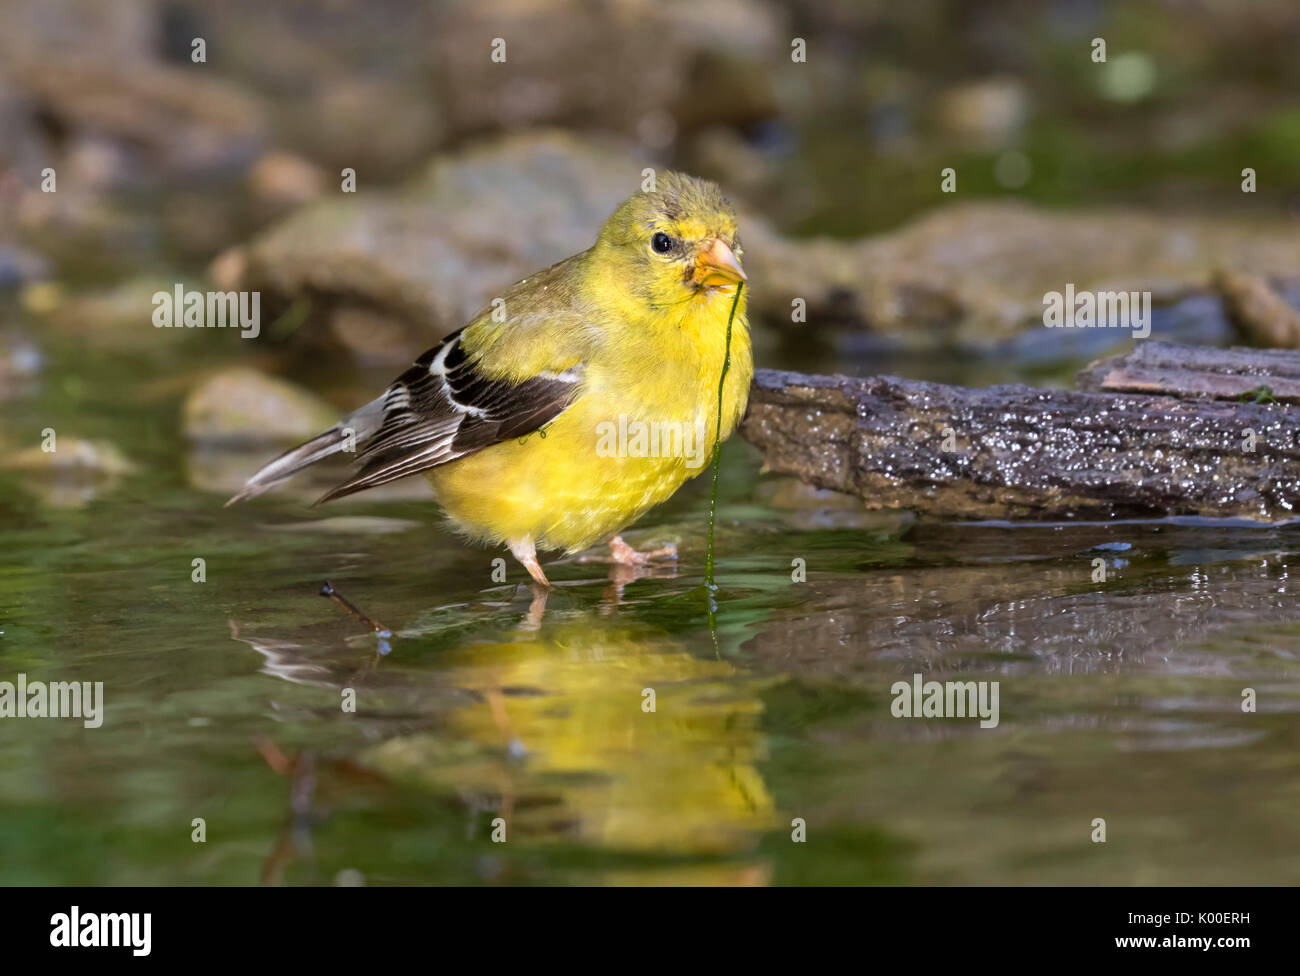 American goldfinch (Spinus tristis), adult female, eating algae in a water stream, Ames, Iowa, USA Stock Photo